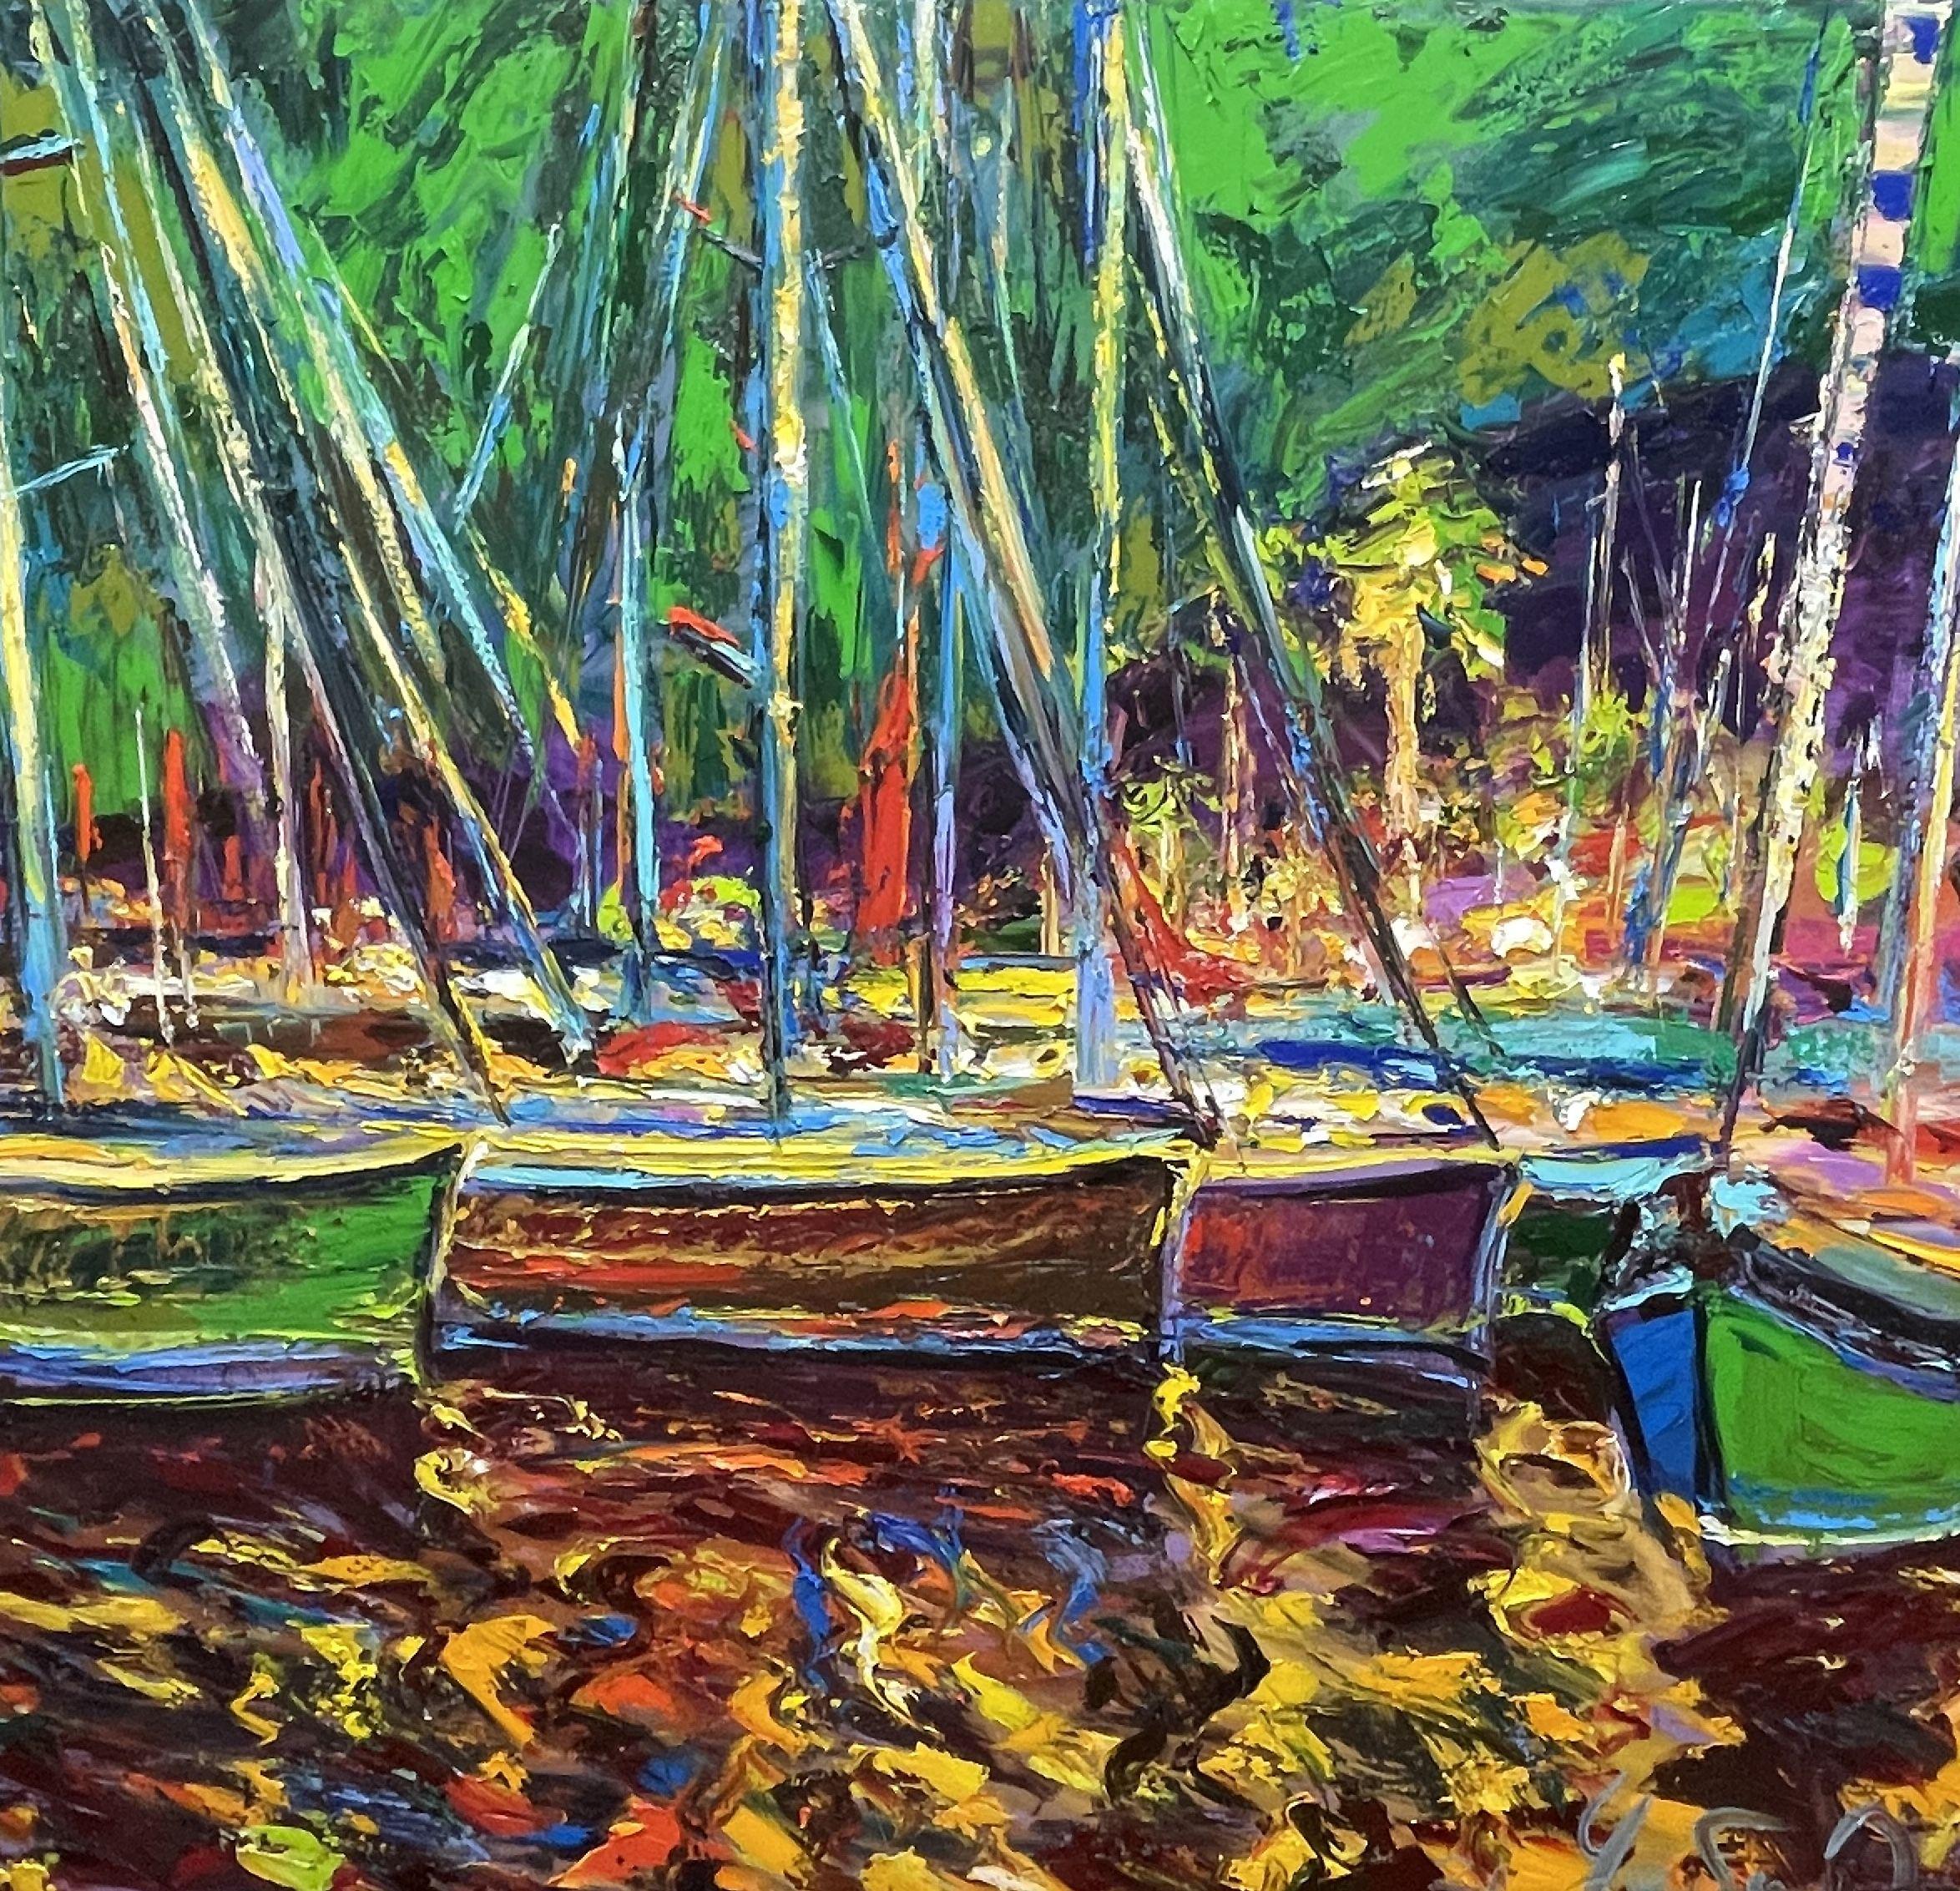 This work of art (Night marina of Marmaris) is a one-of-a-kind bright colorful canvas. I make really bright colors. I painted in the free style of the Impasto Impressionists.    Painted with high quality oil paints on artistic stretched canvas, this